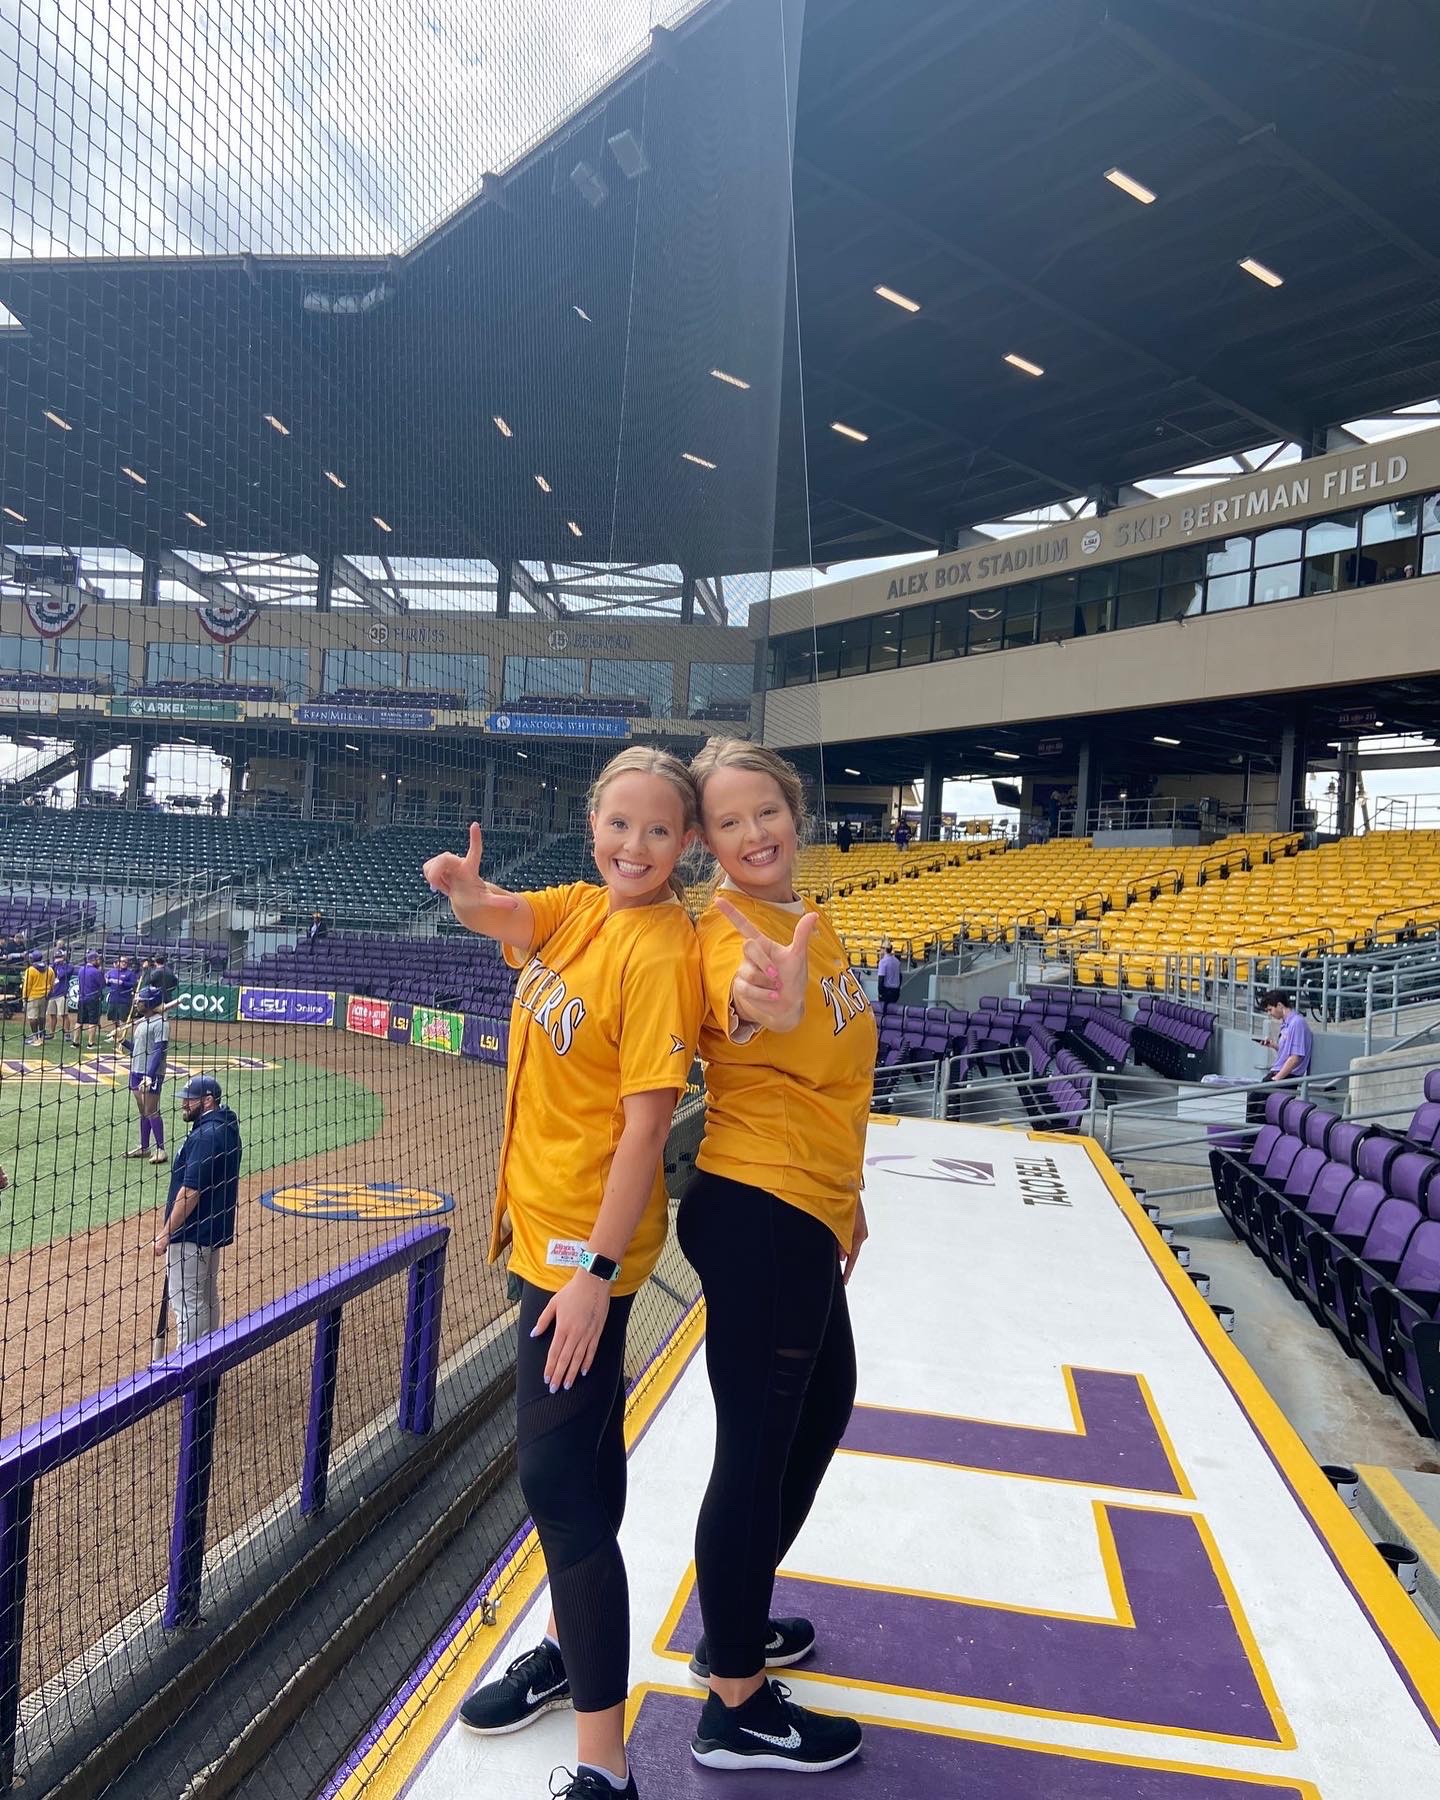 Two women stand back to back smiling. They both wear gold LSU jerseys